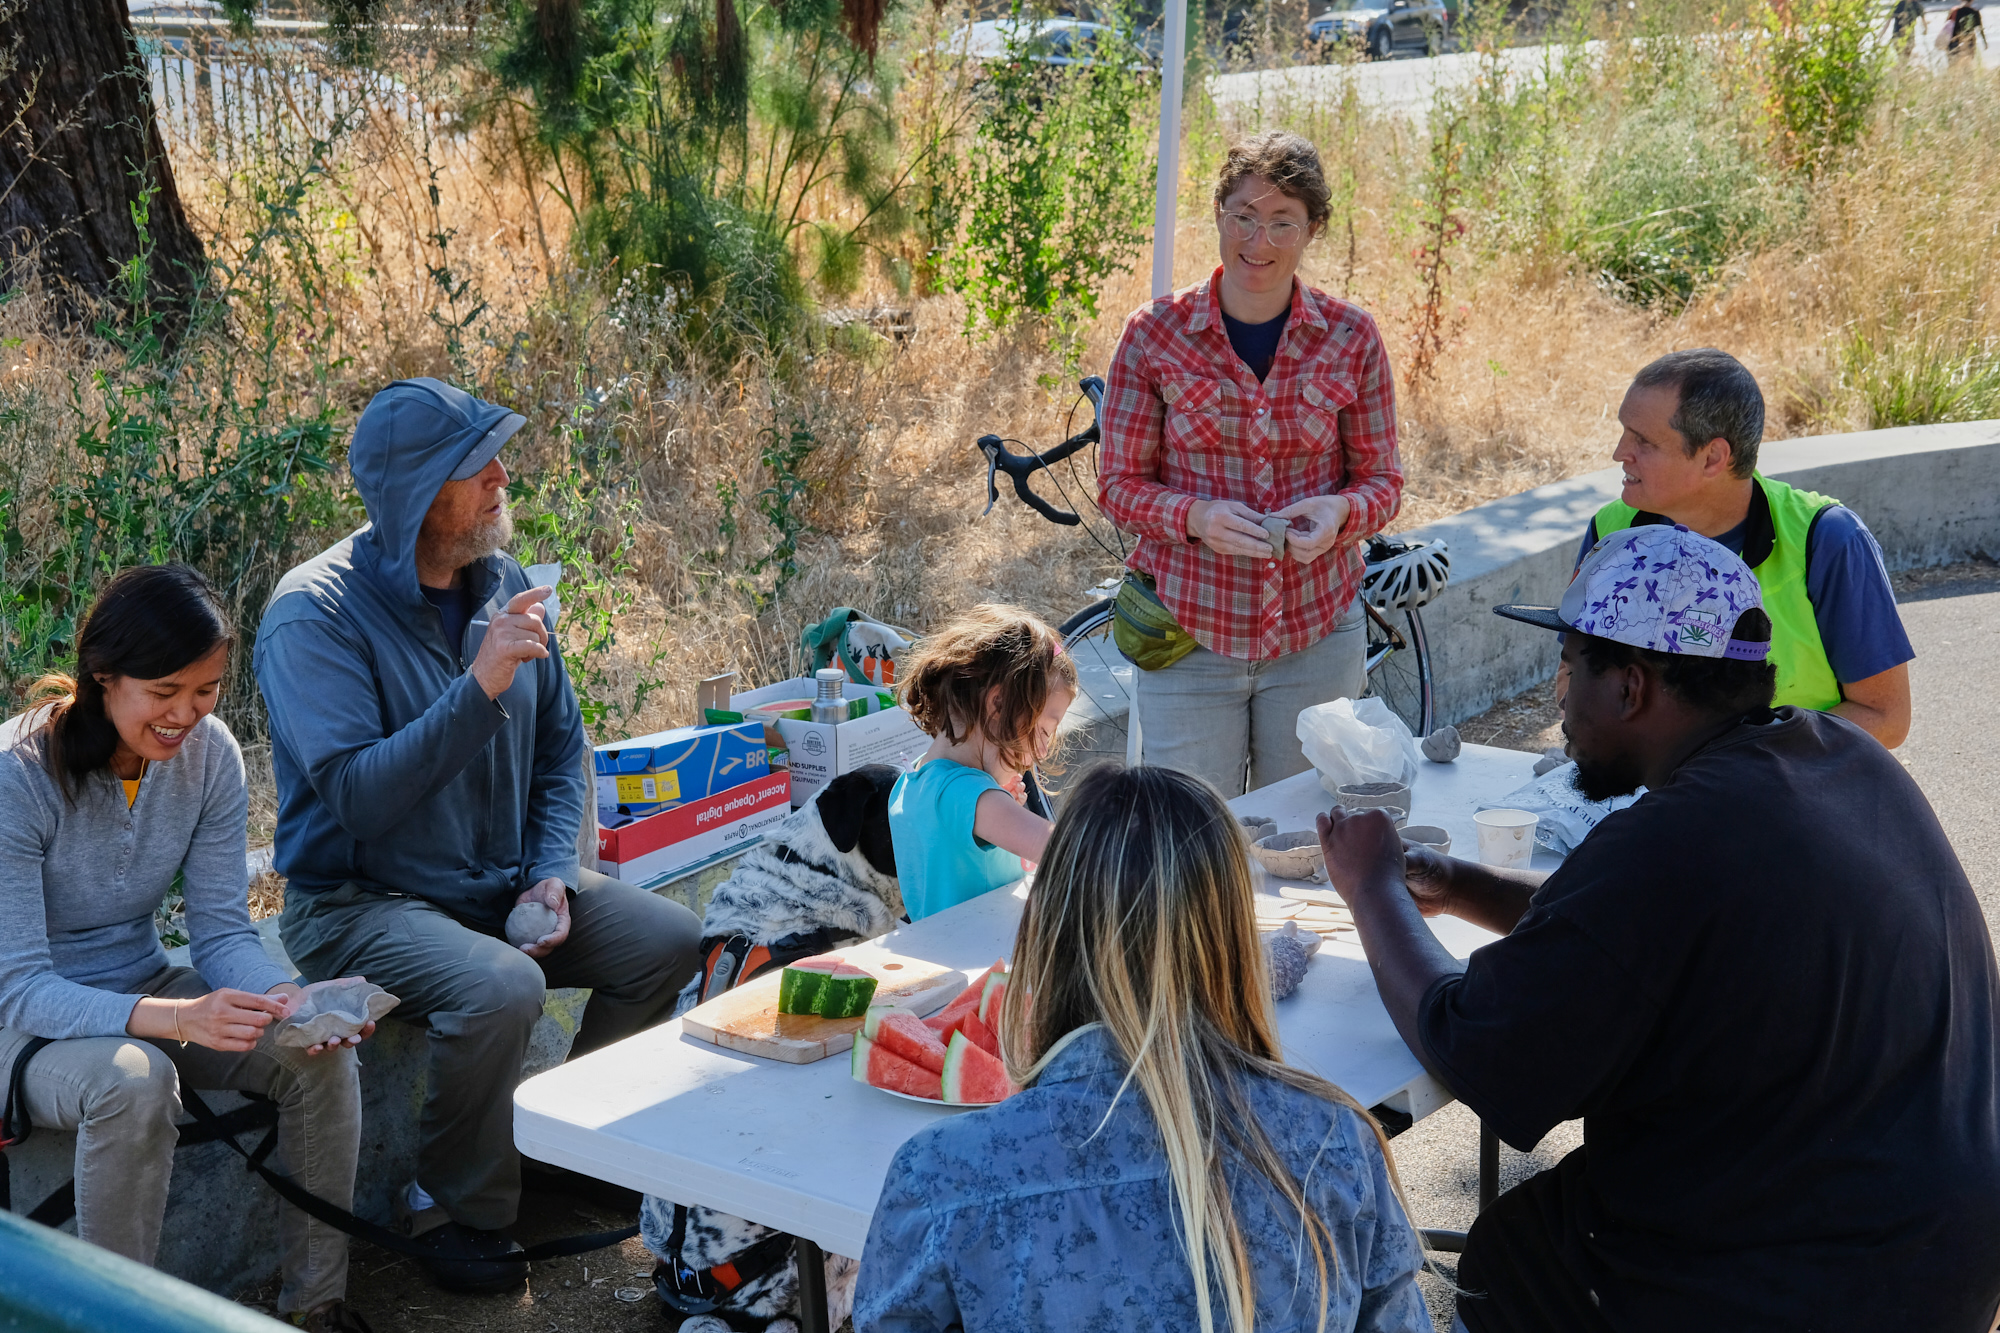 Cups and Clay workshop, led by Emma Spertus at Peralta Park, Oakland